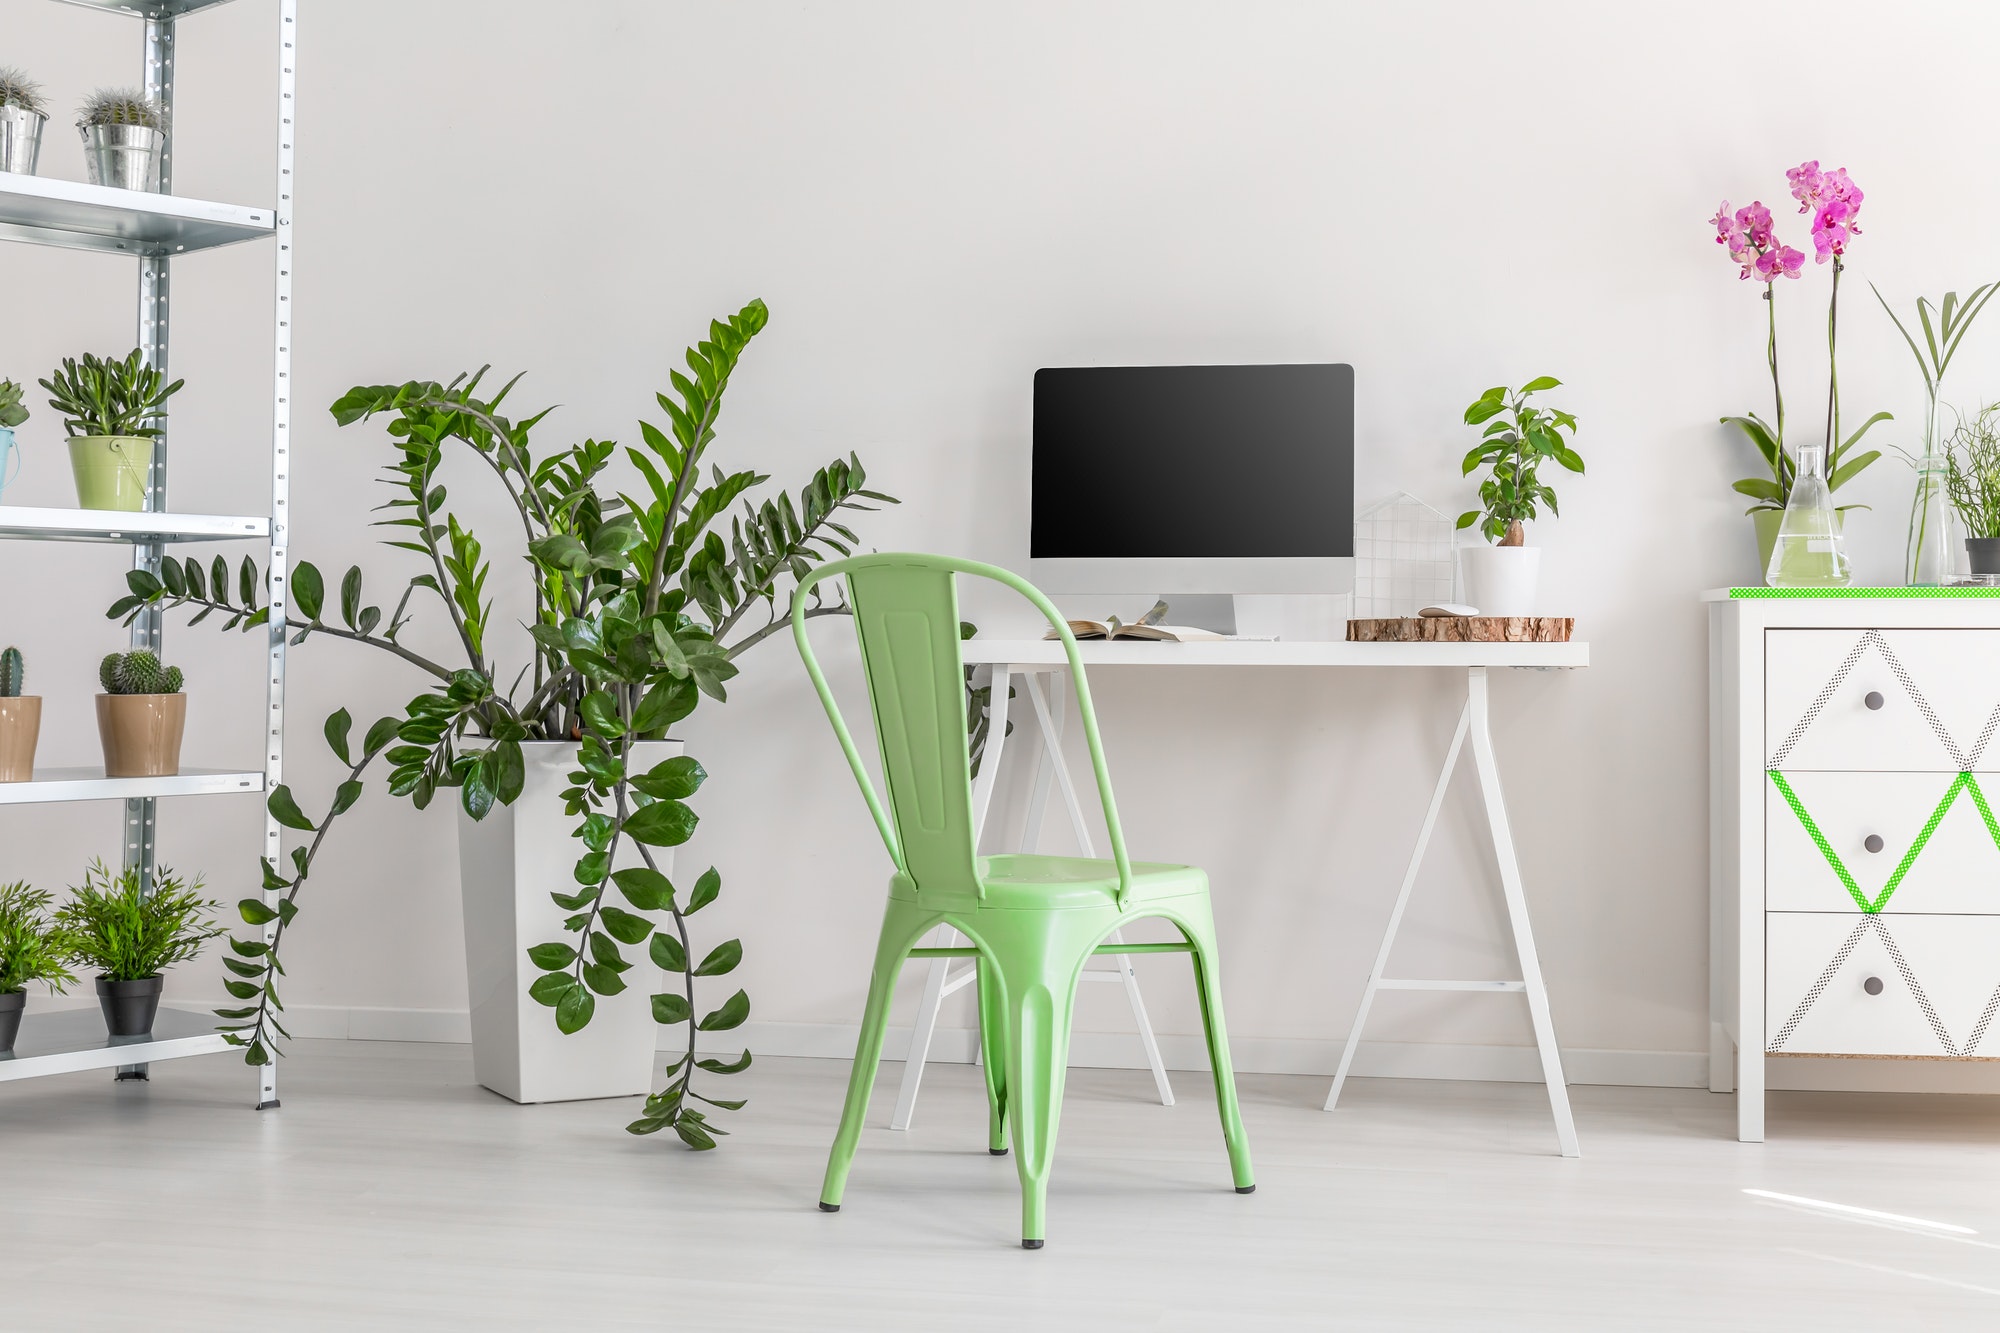 Minimalist workplace surrounded by plants